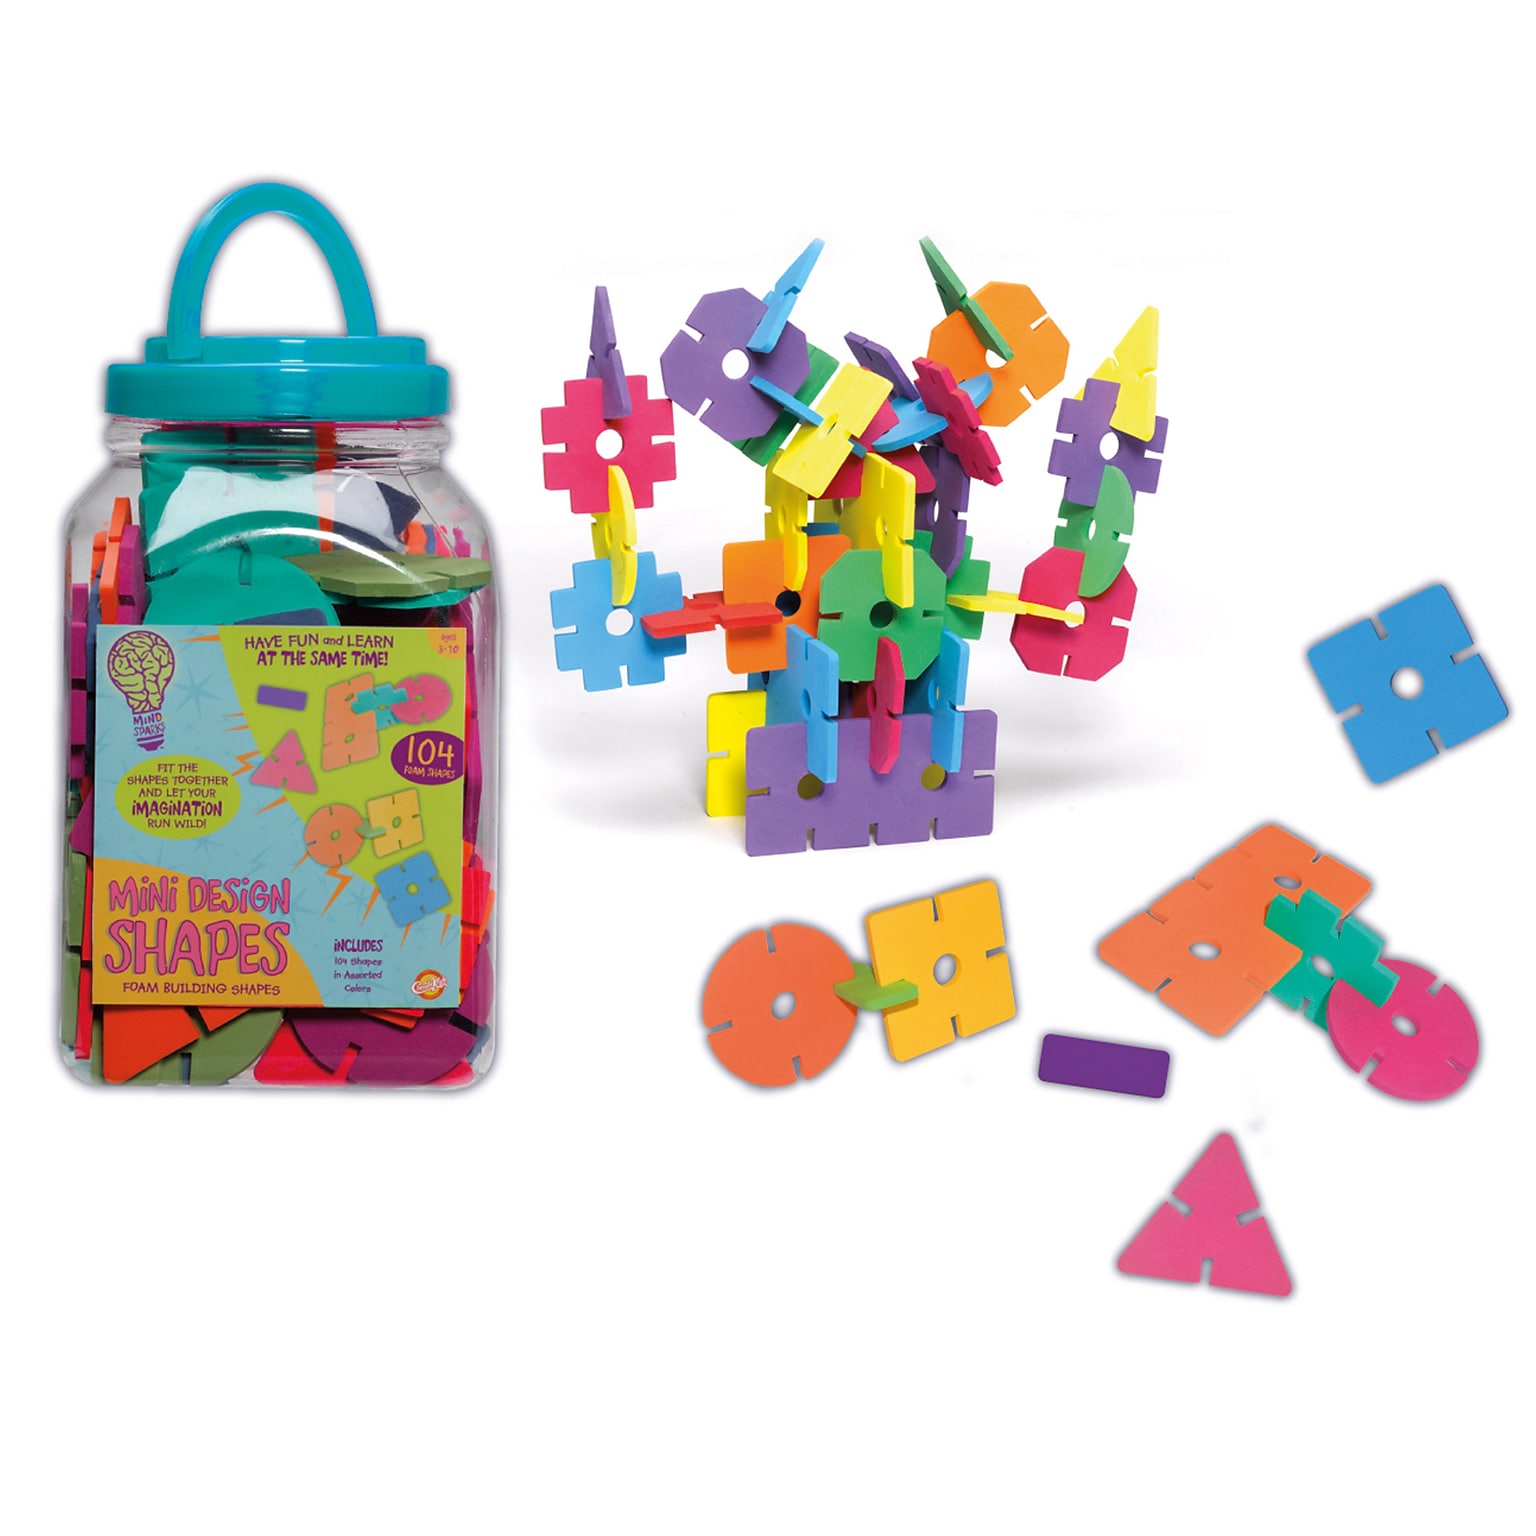 WonderFoam® Early Learning Mini Design Shapes, 104 Pieces (CK-9314)